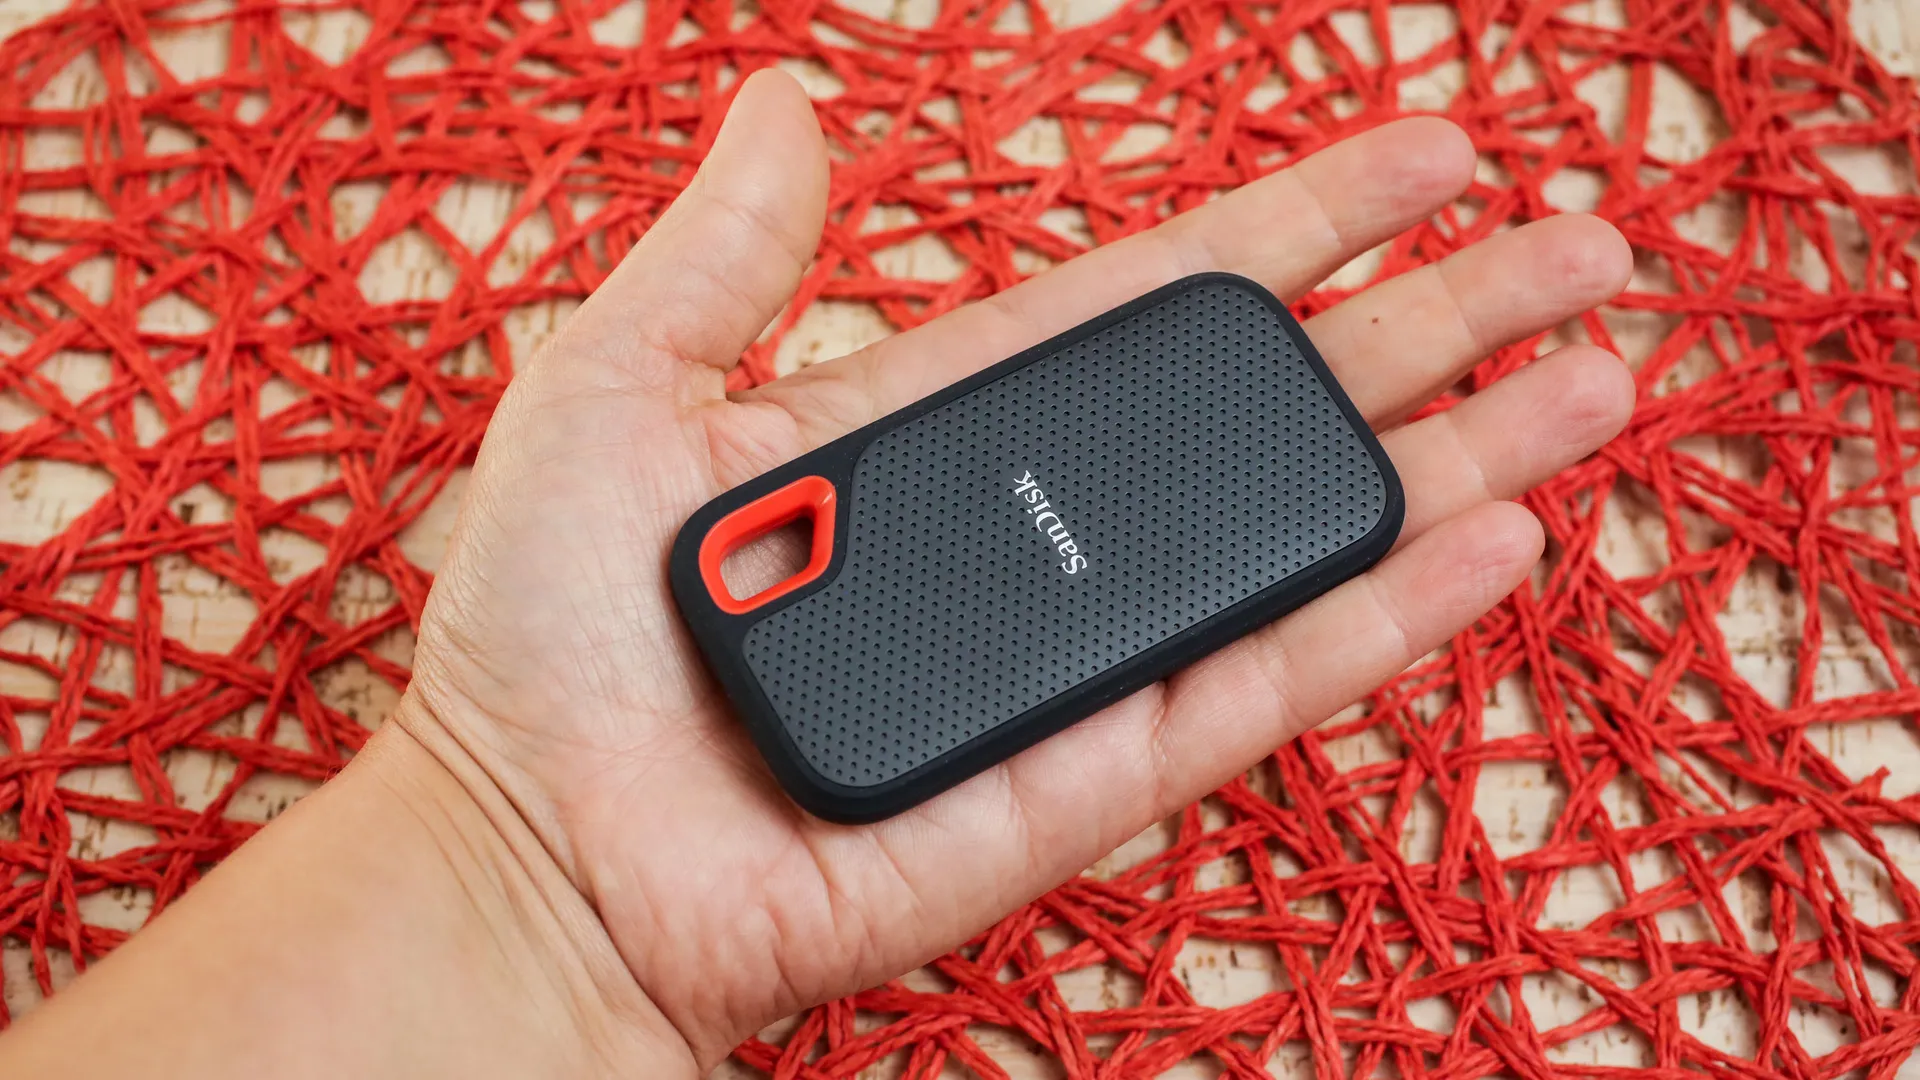 How To Use The Sandisk Extreme Portable SSD